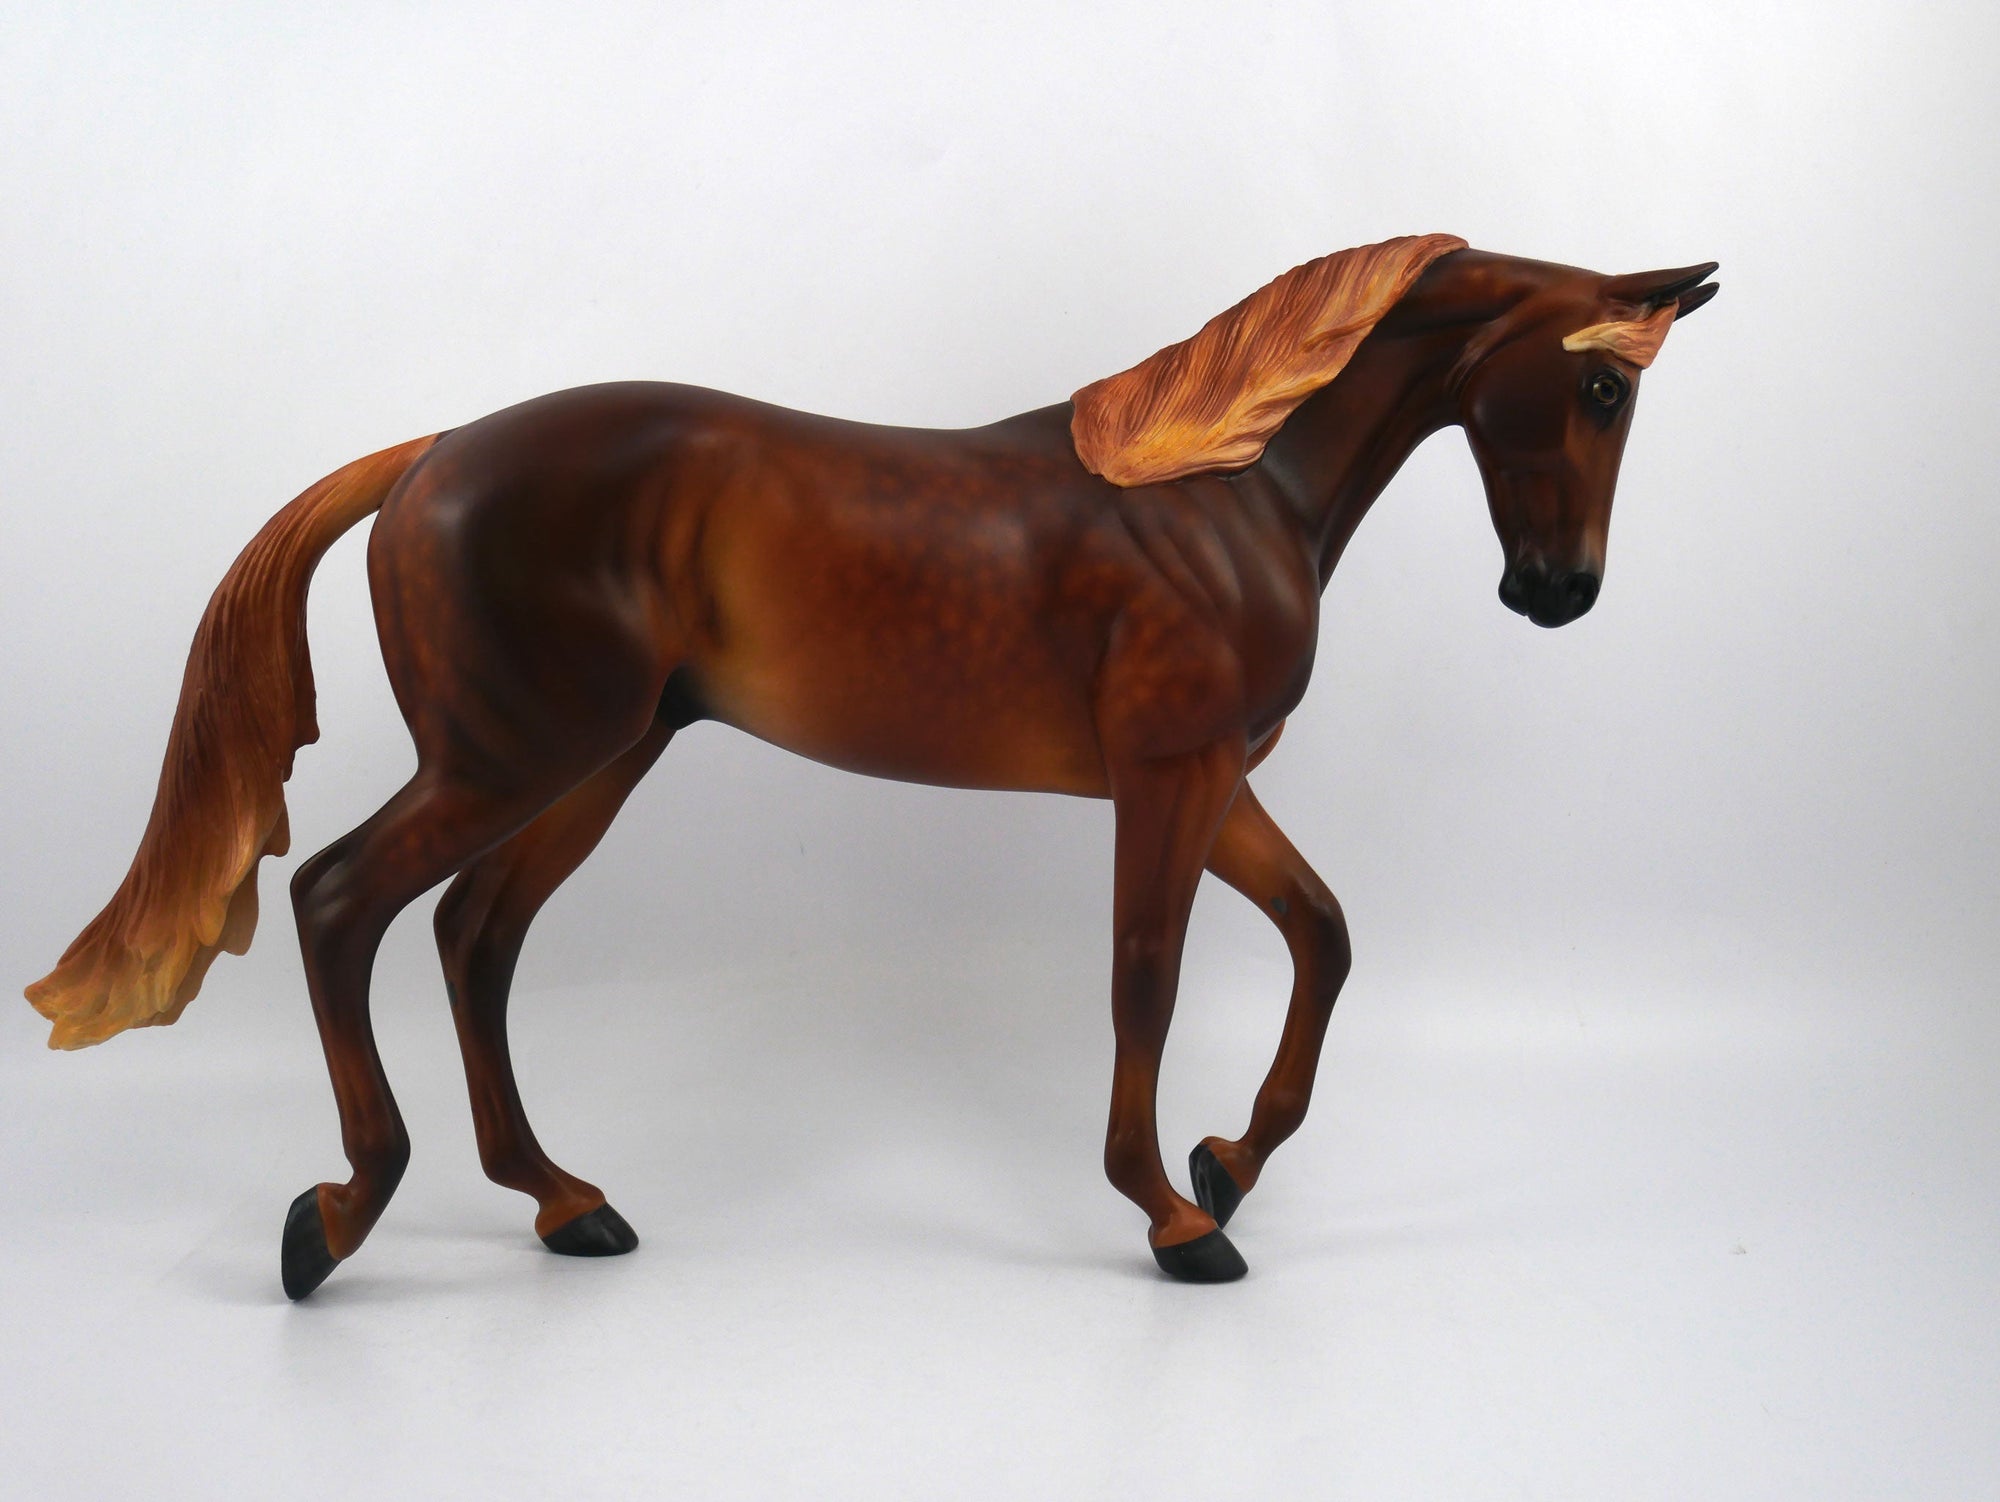 Ralph the Mouth-OOAK Dapple Chestnut Thoroughbred Painted by Sheryl Leisure 1/20